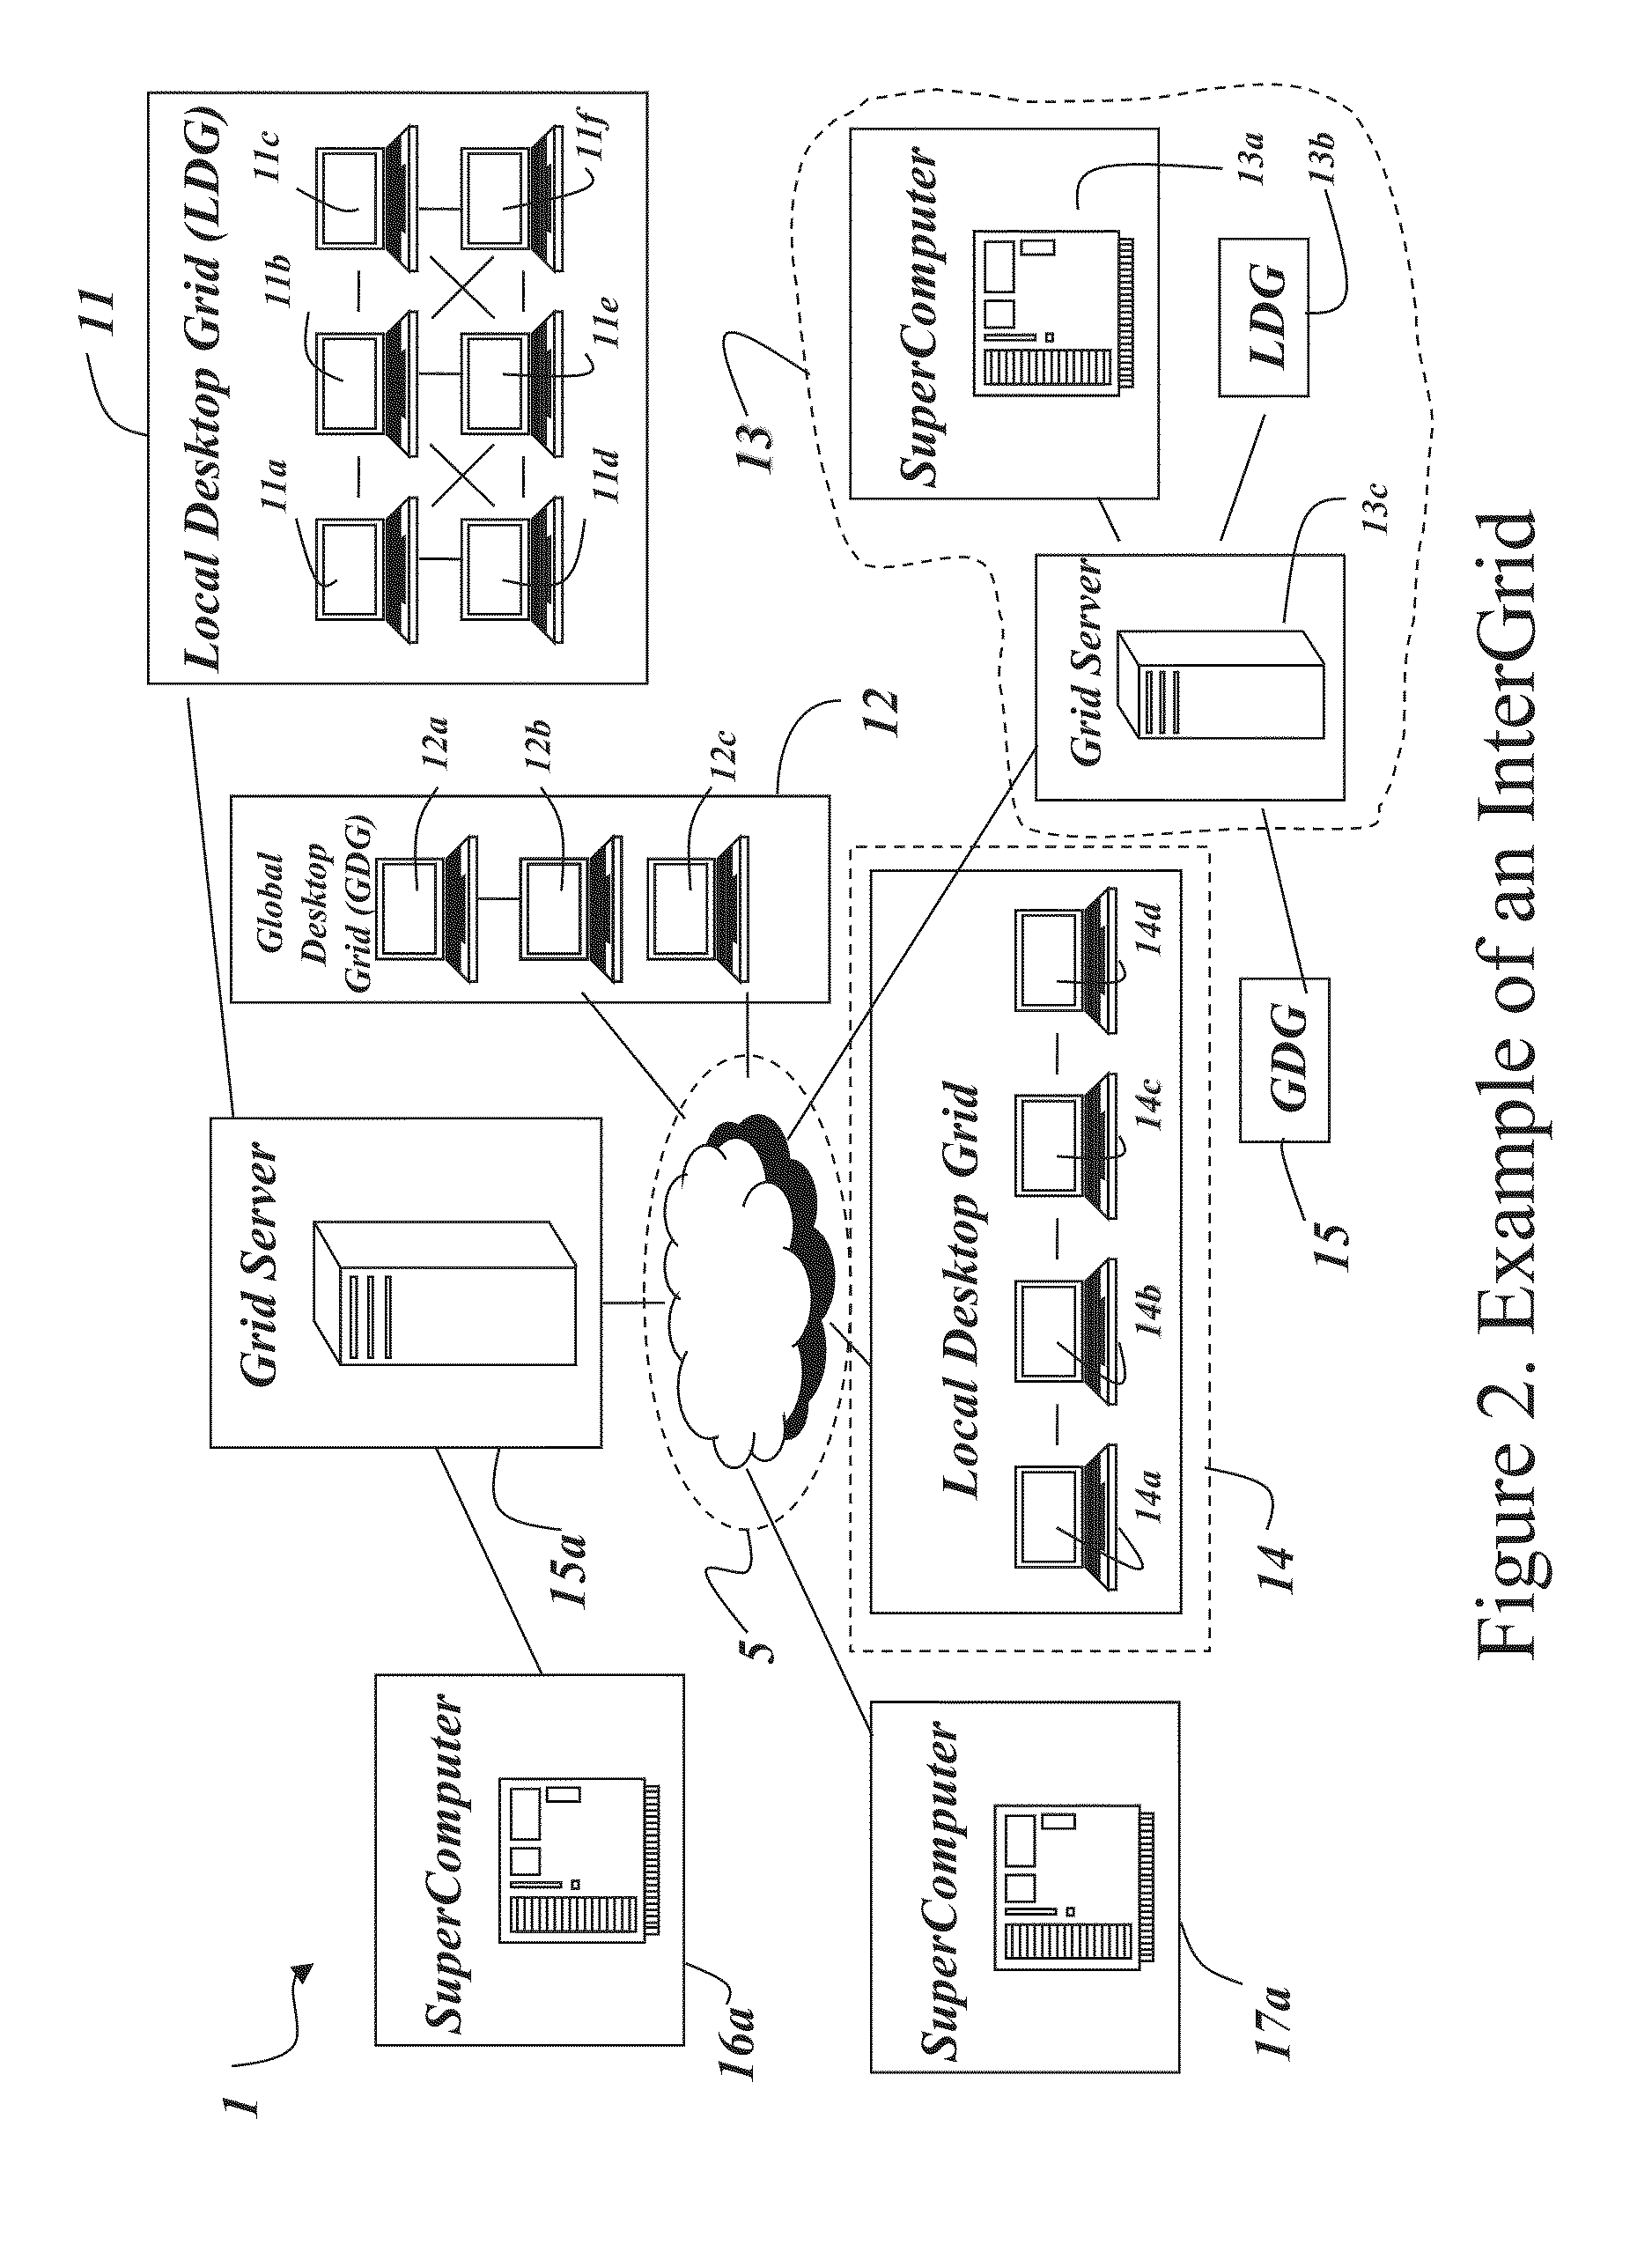 Information Processing Grid and Method for High Performance and Efficient Resource Utilization